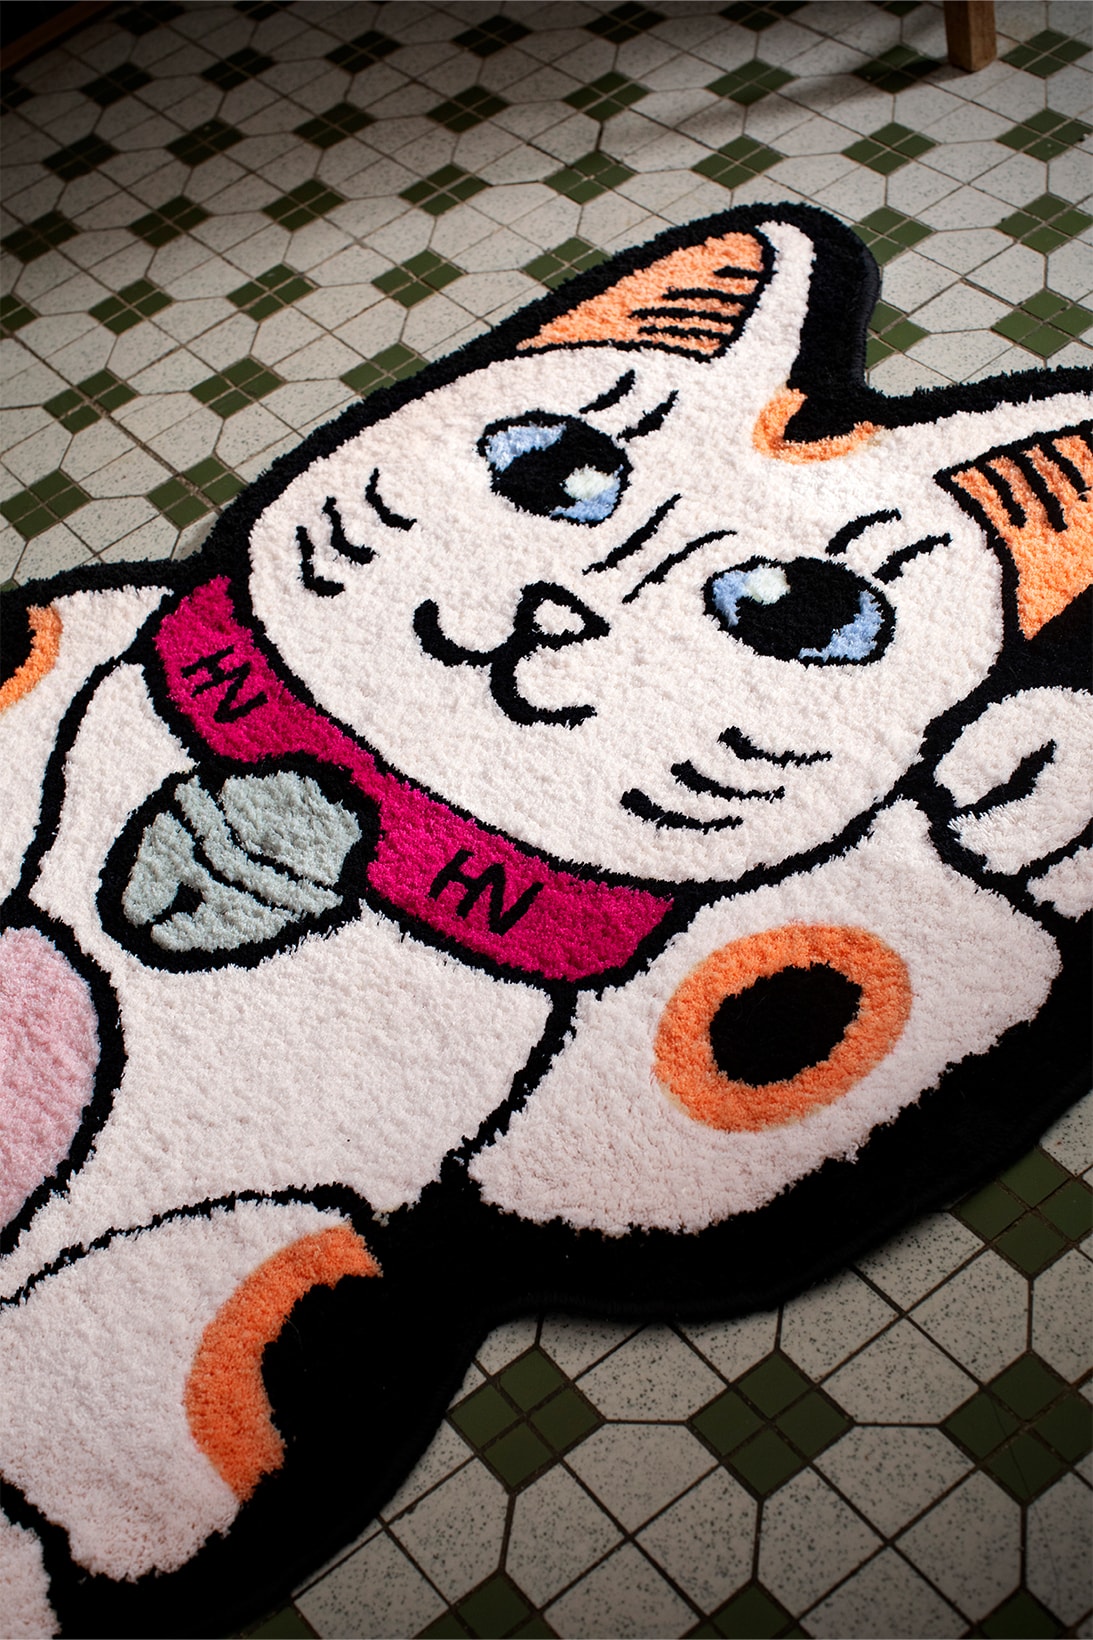 Harvey Nichols RAW EMOTIONS "Lucky Cat" Rug Limited-Edition Lunar New Year White Pastel Pink Details